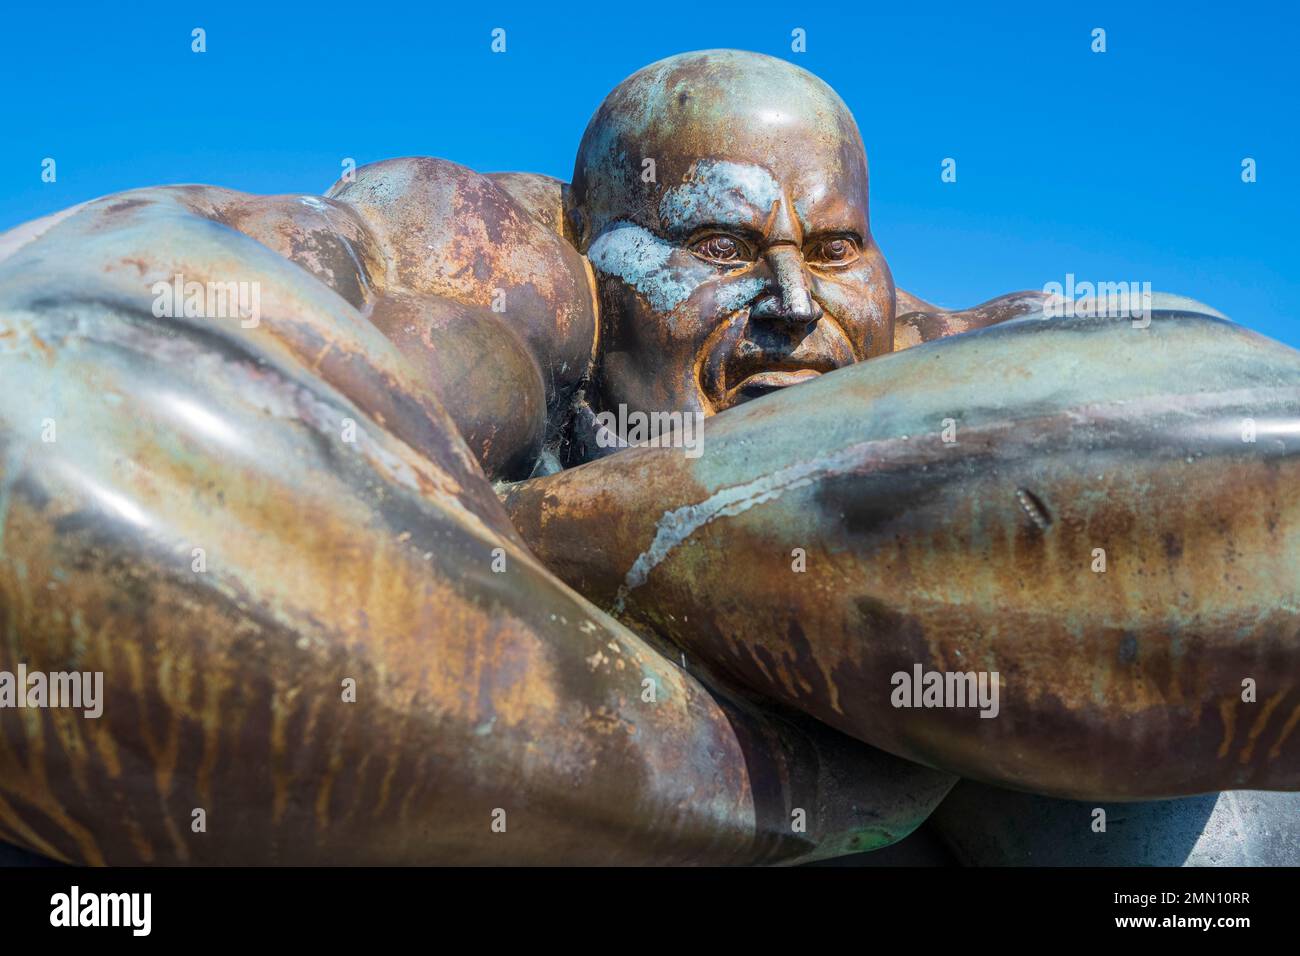 Spain, Galicia, A Coruña, Sculptures Park of the Hercules Tower, Charon (1994) by sculptor Ramon Conde, pilot of the Hells boat in Greek mythology Stock Photo